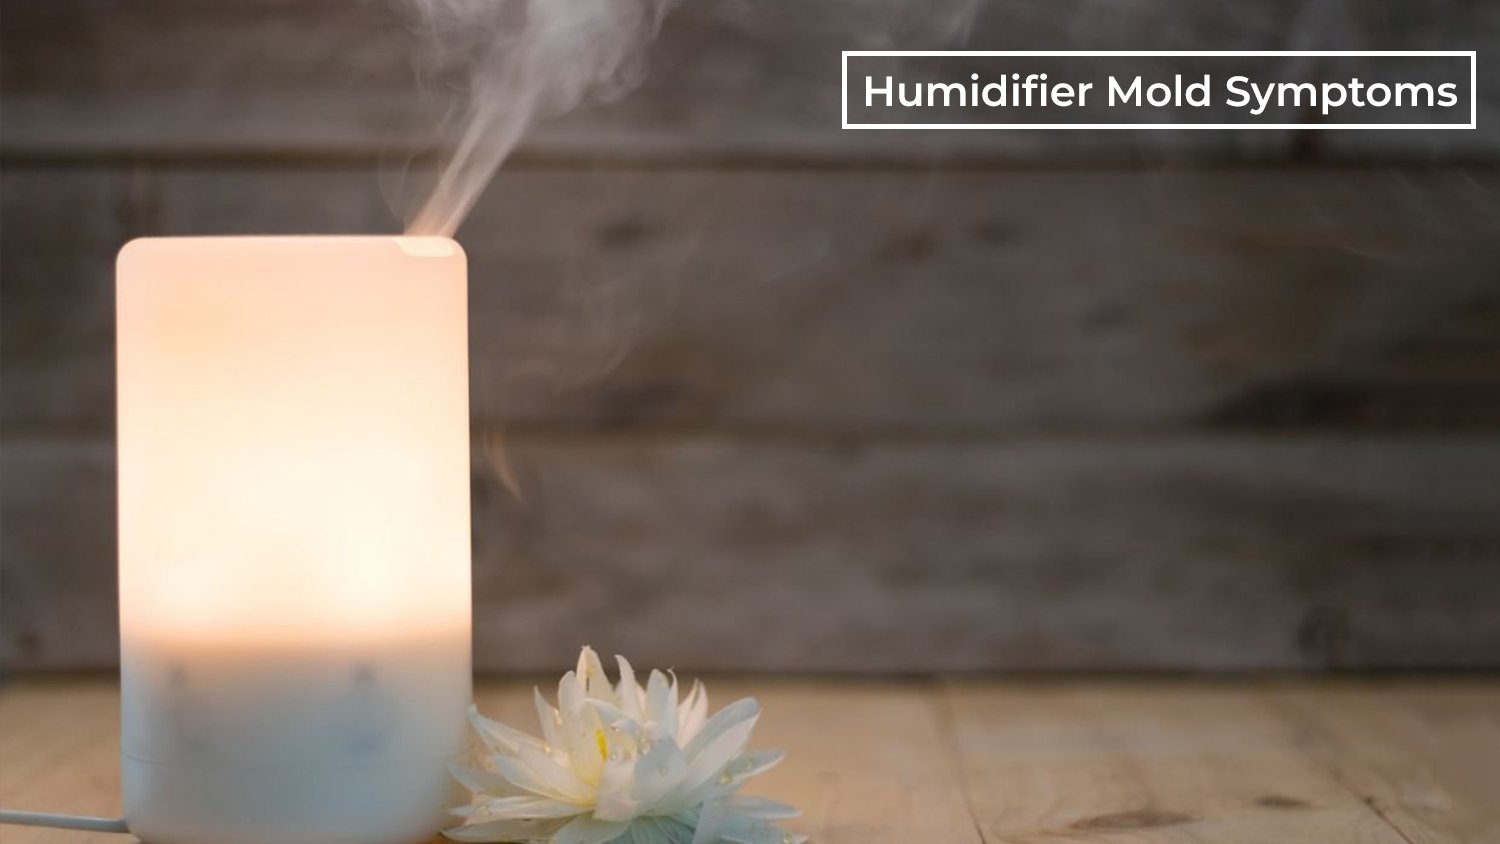 Humidifier Mold Symptoms: The Unseen Risks and How to Prevent Them